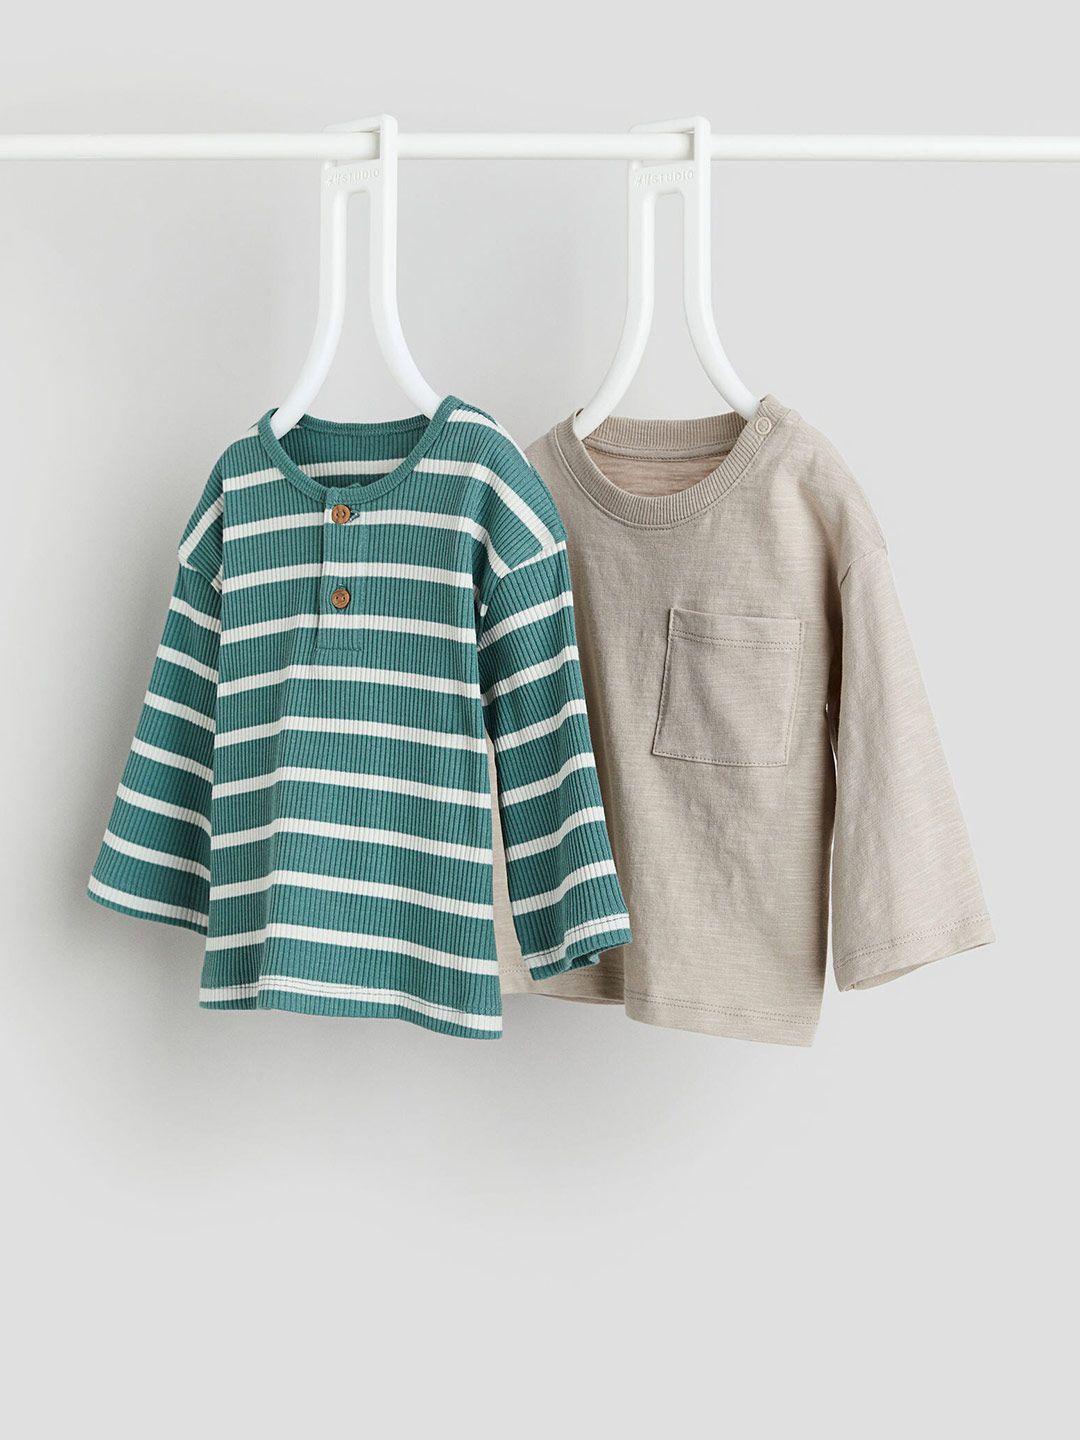 h&m infant boys 2-pack cotton jersey tops